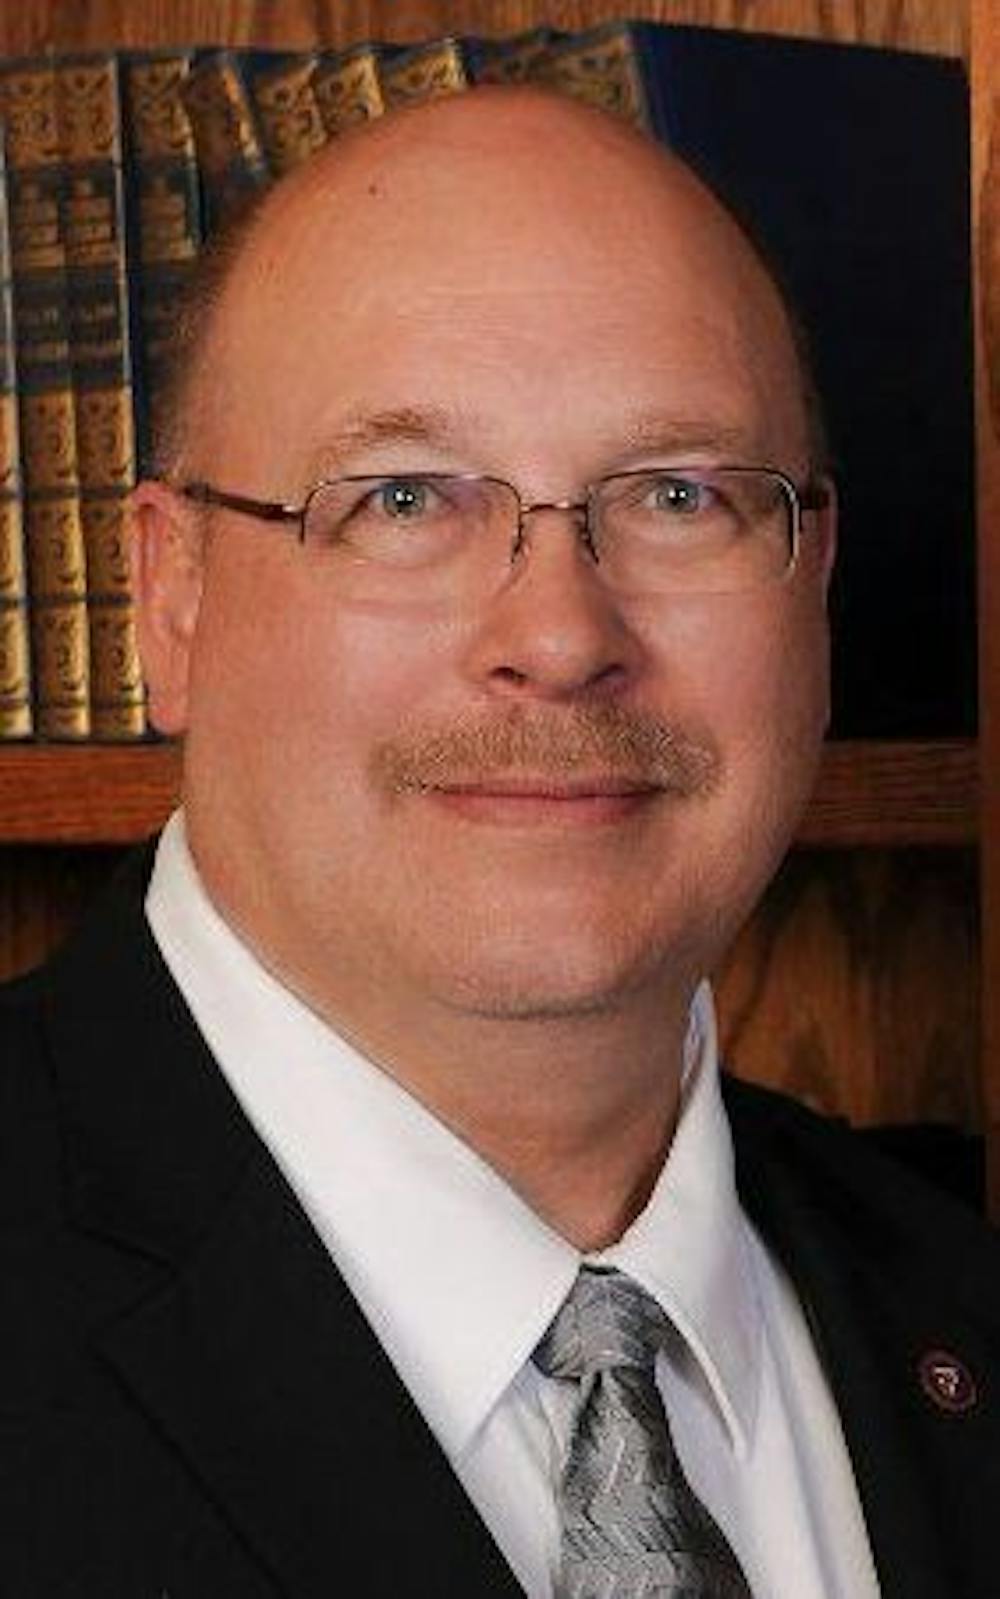 State superintendent candidate Lowell Holtz has come under fire from One Wisconsin Now for his potential misuse of public resources.